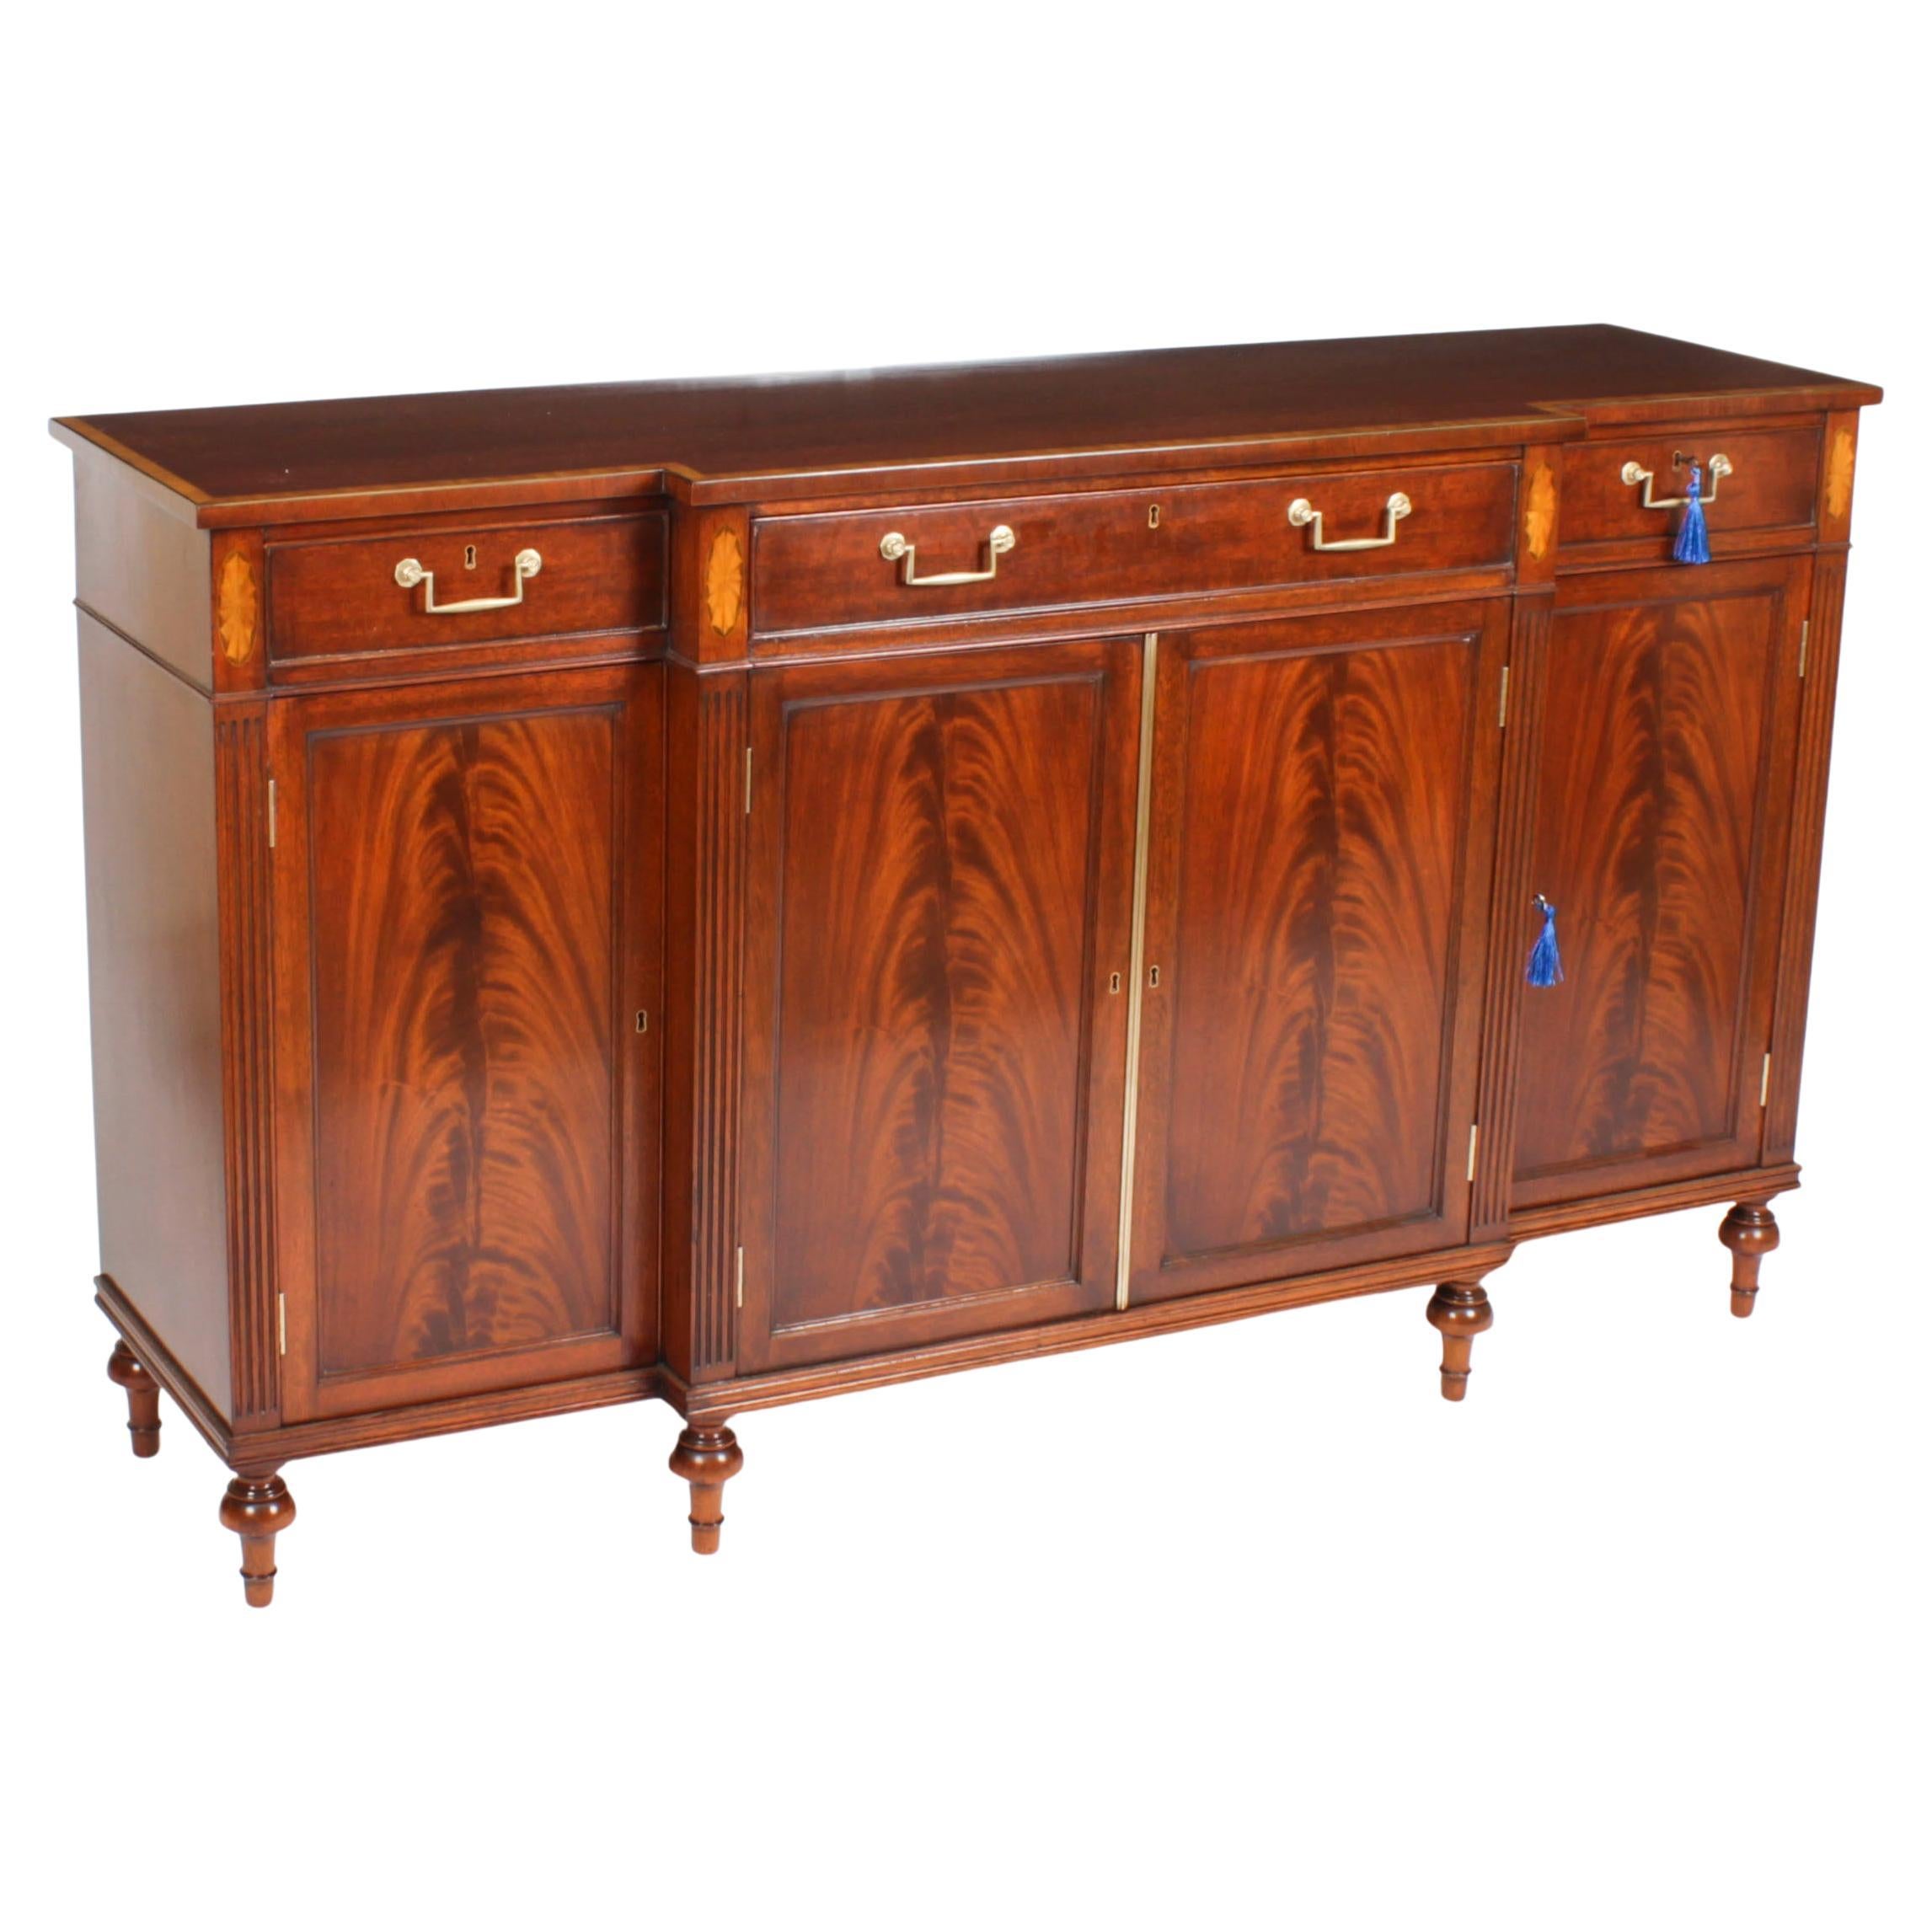 Vintage Flame Mahogany Sideboard by William Tillman, 20th Century For Sale